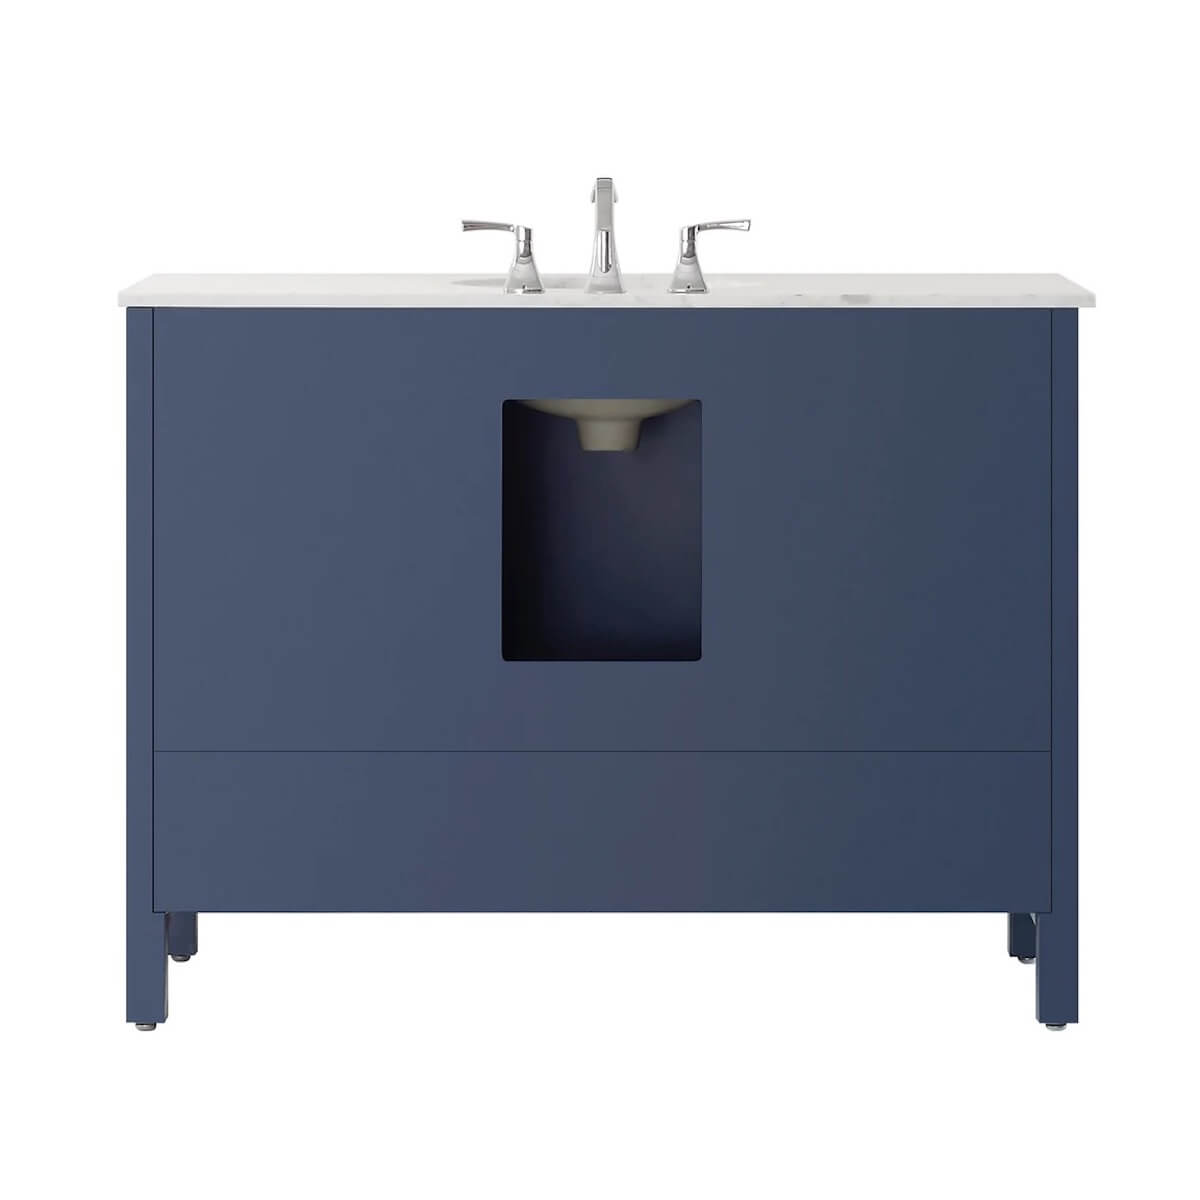 Vinnova 48” Gela Royal Blue Freestanding Single Vanity with Carrara White Marble Countertop Without Mirror Back 723048-RB-CA-NM